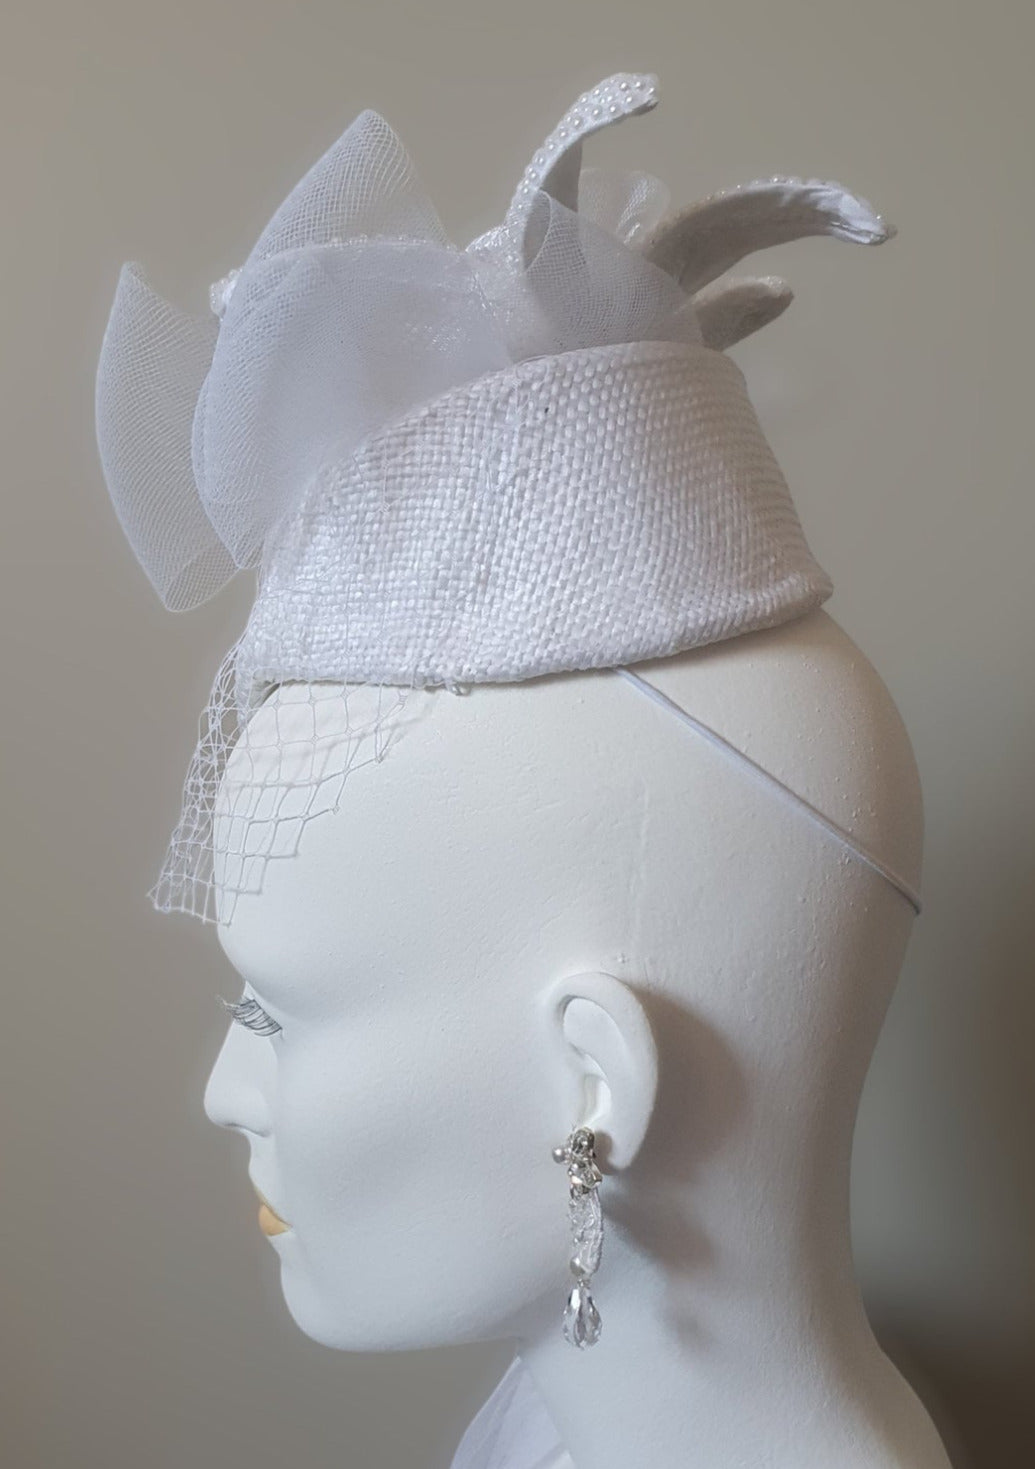 Handmade Fascinator from White Visca Material - Perfect for Weddings and Festive Occasions